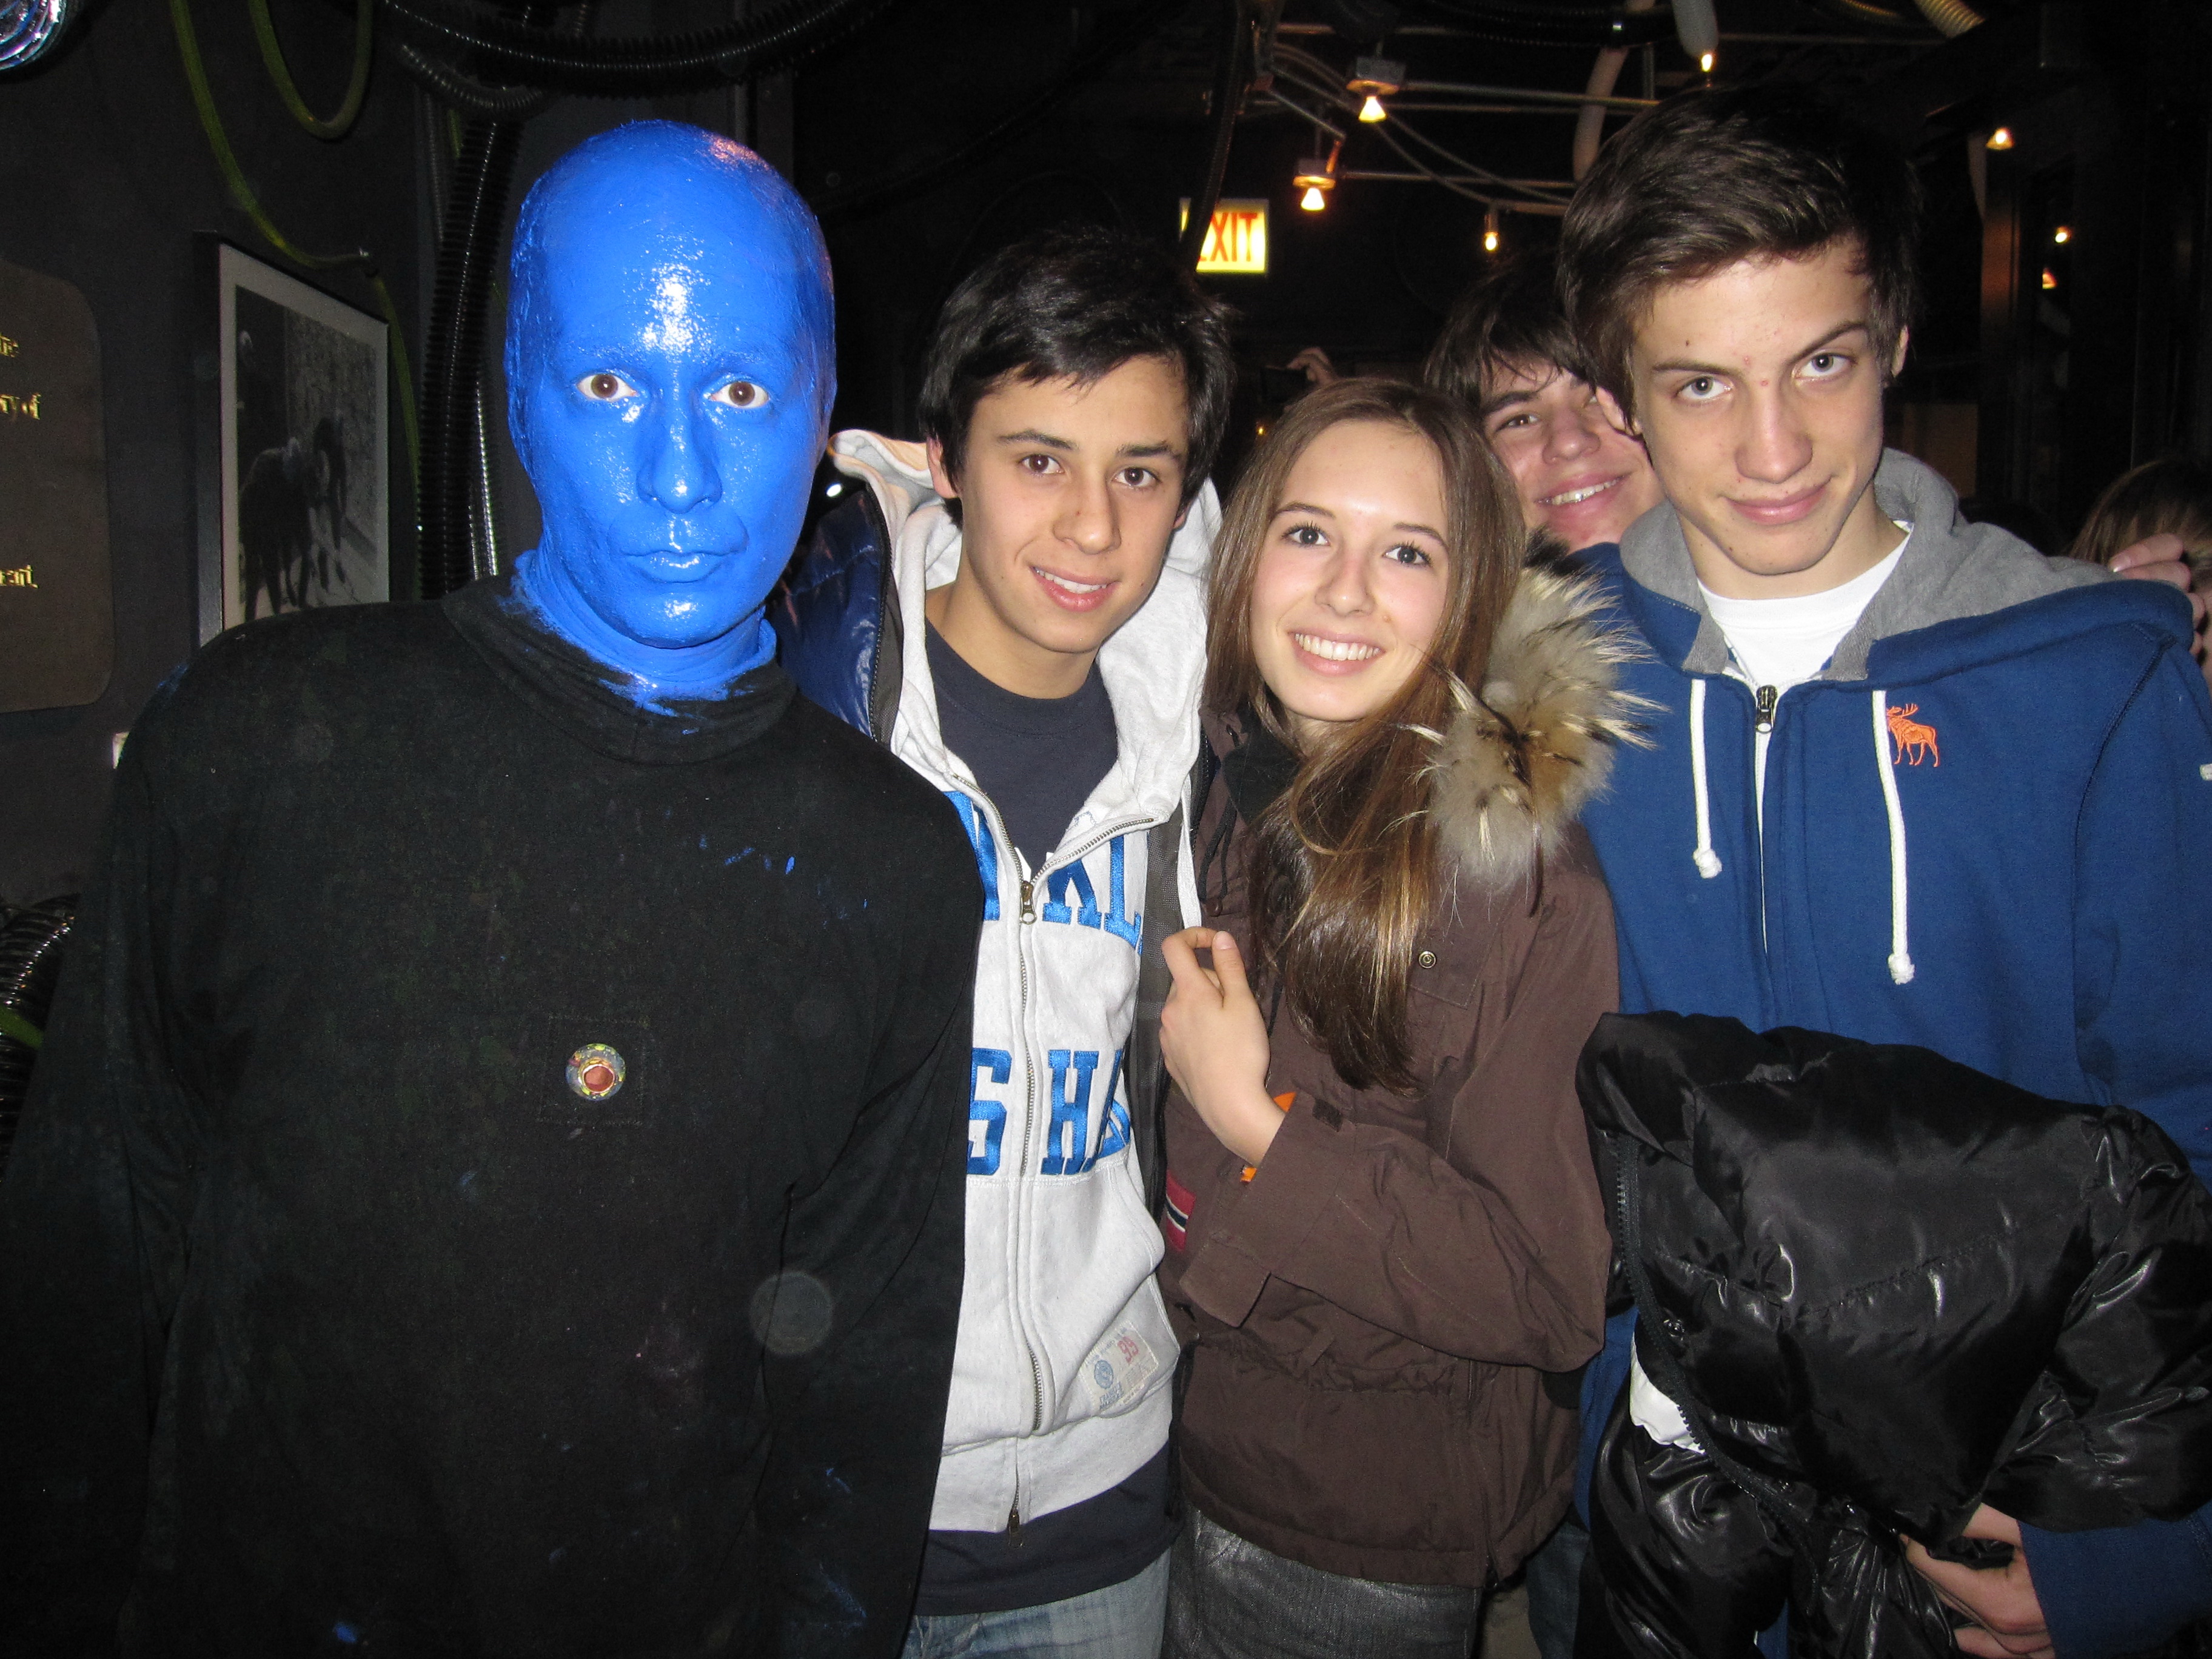 THE BLUE MAN GROUP